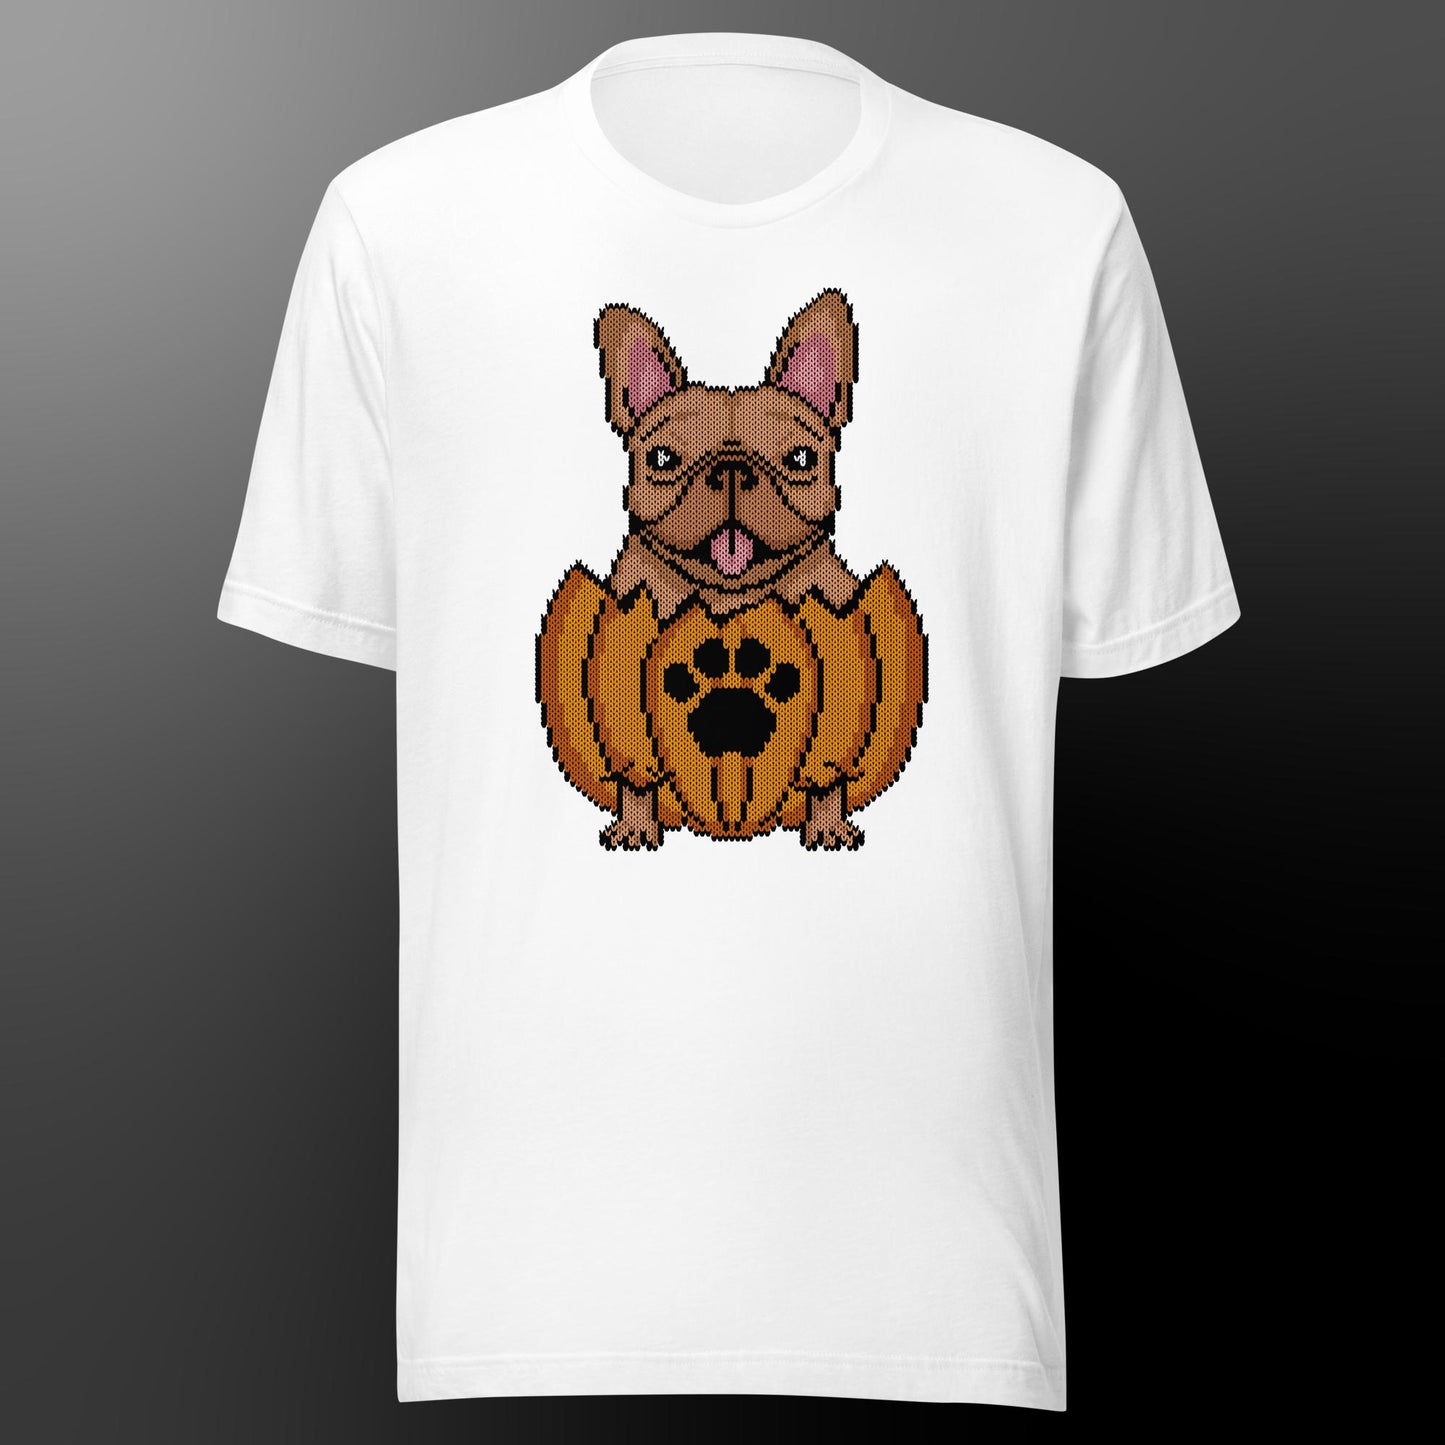 Halloween shirt with frenchie (fur color red fawn)